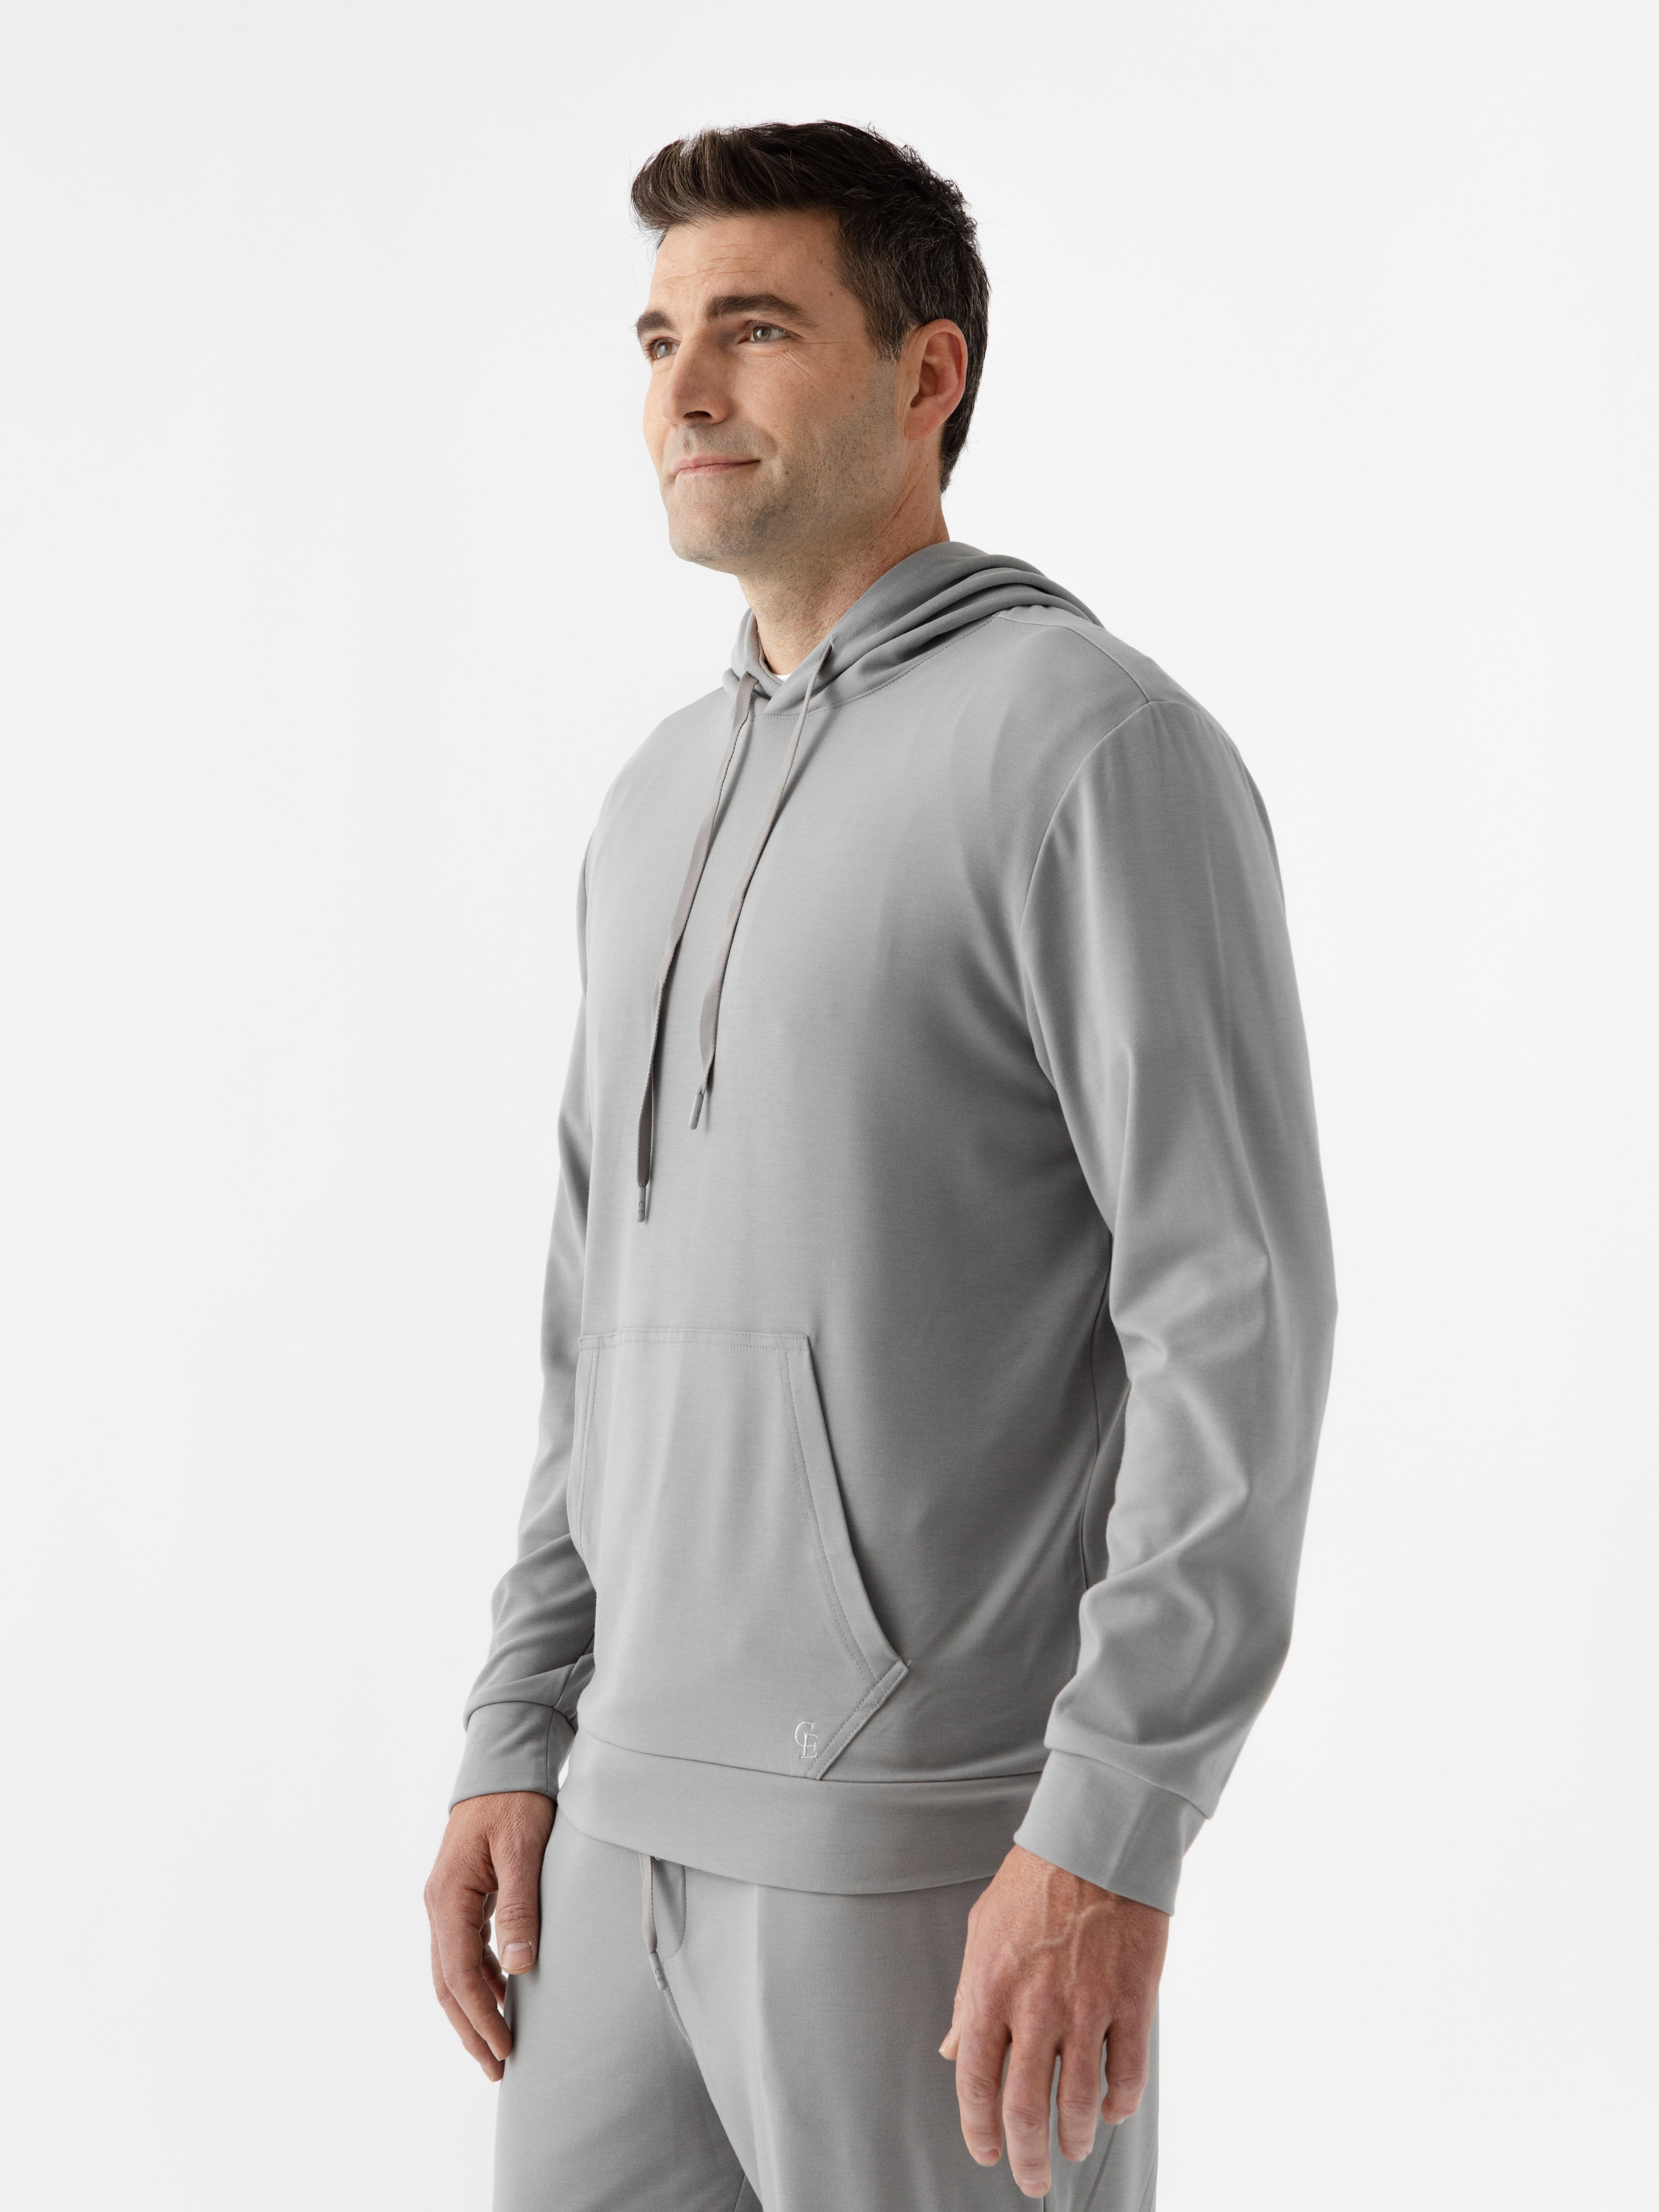 Stone Bamboo Hoodie worn by man standing in front of white background.|Color:Stone